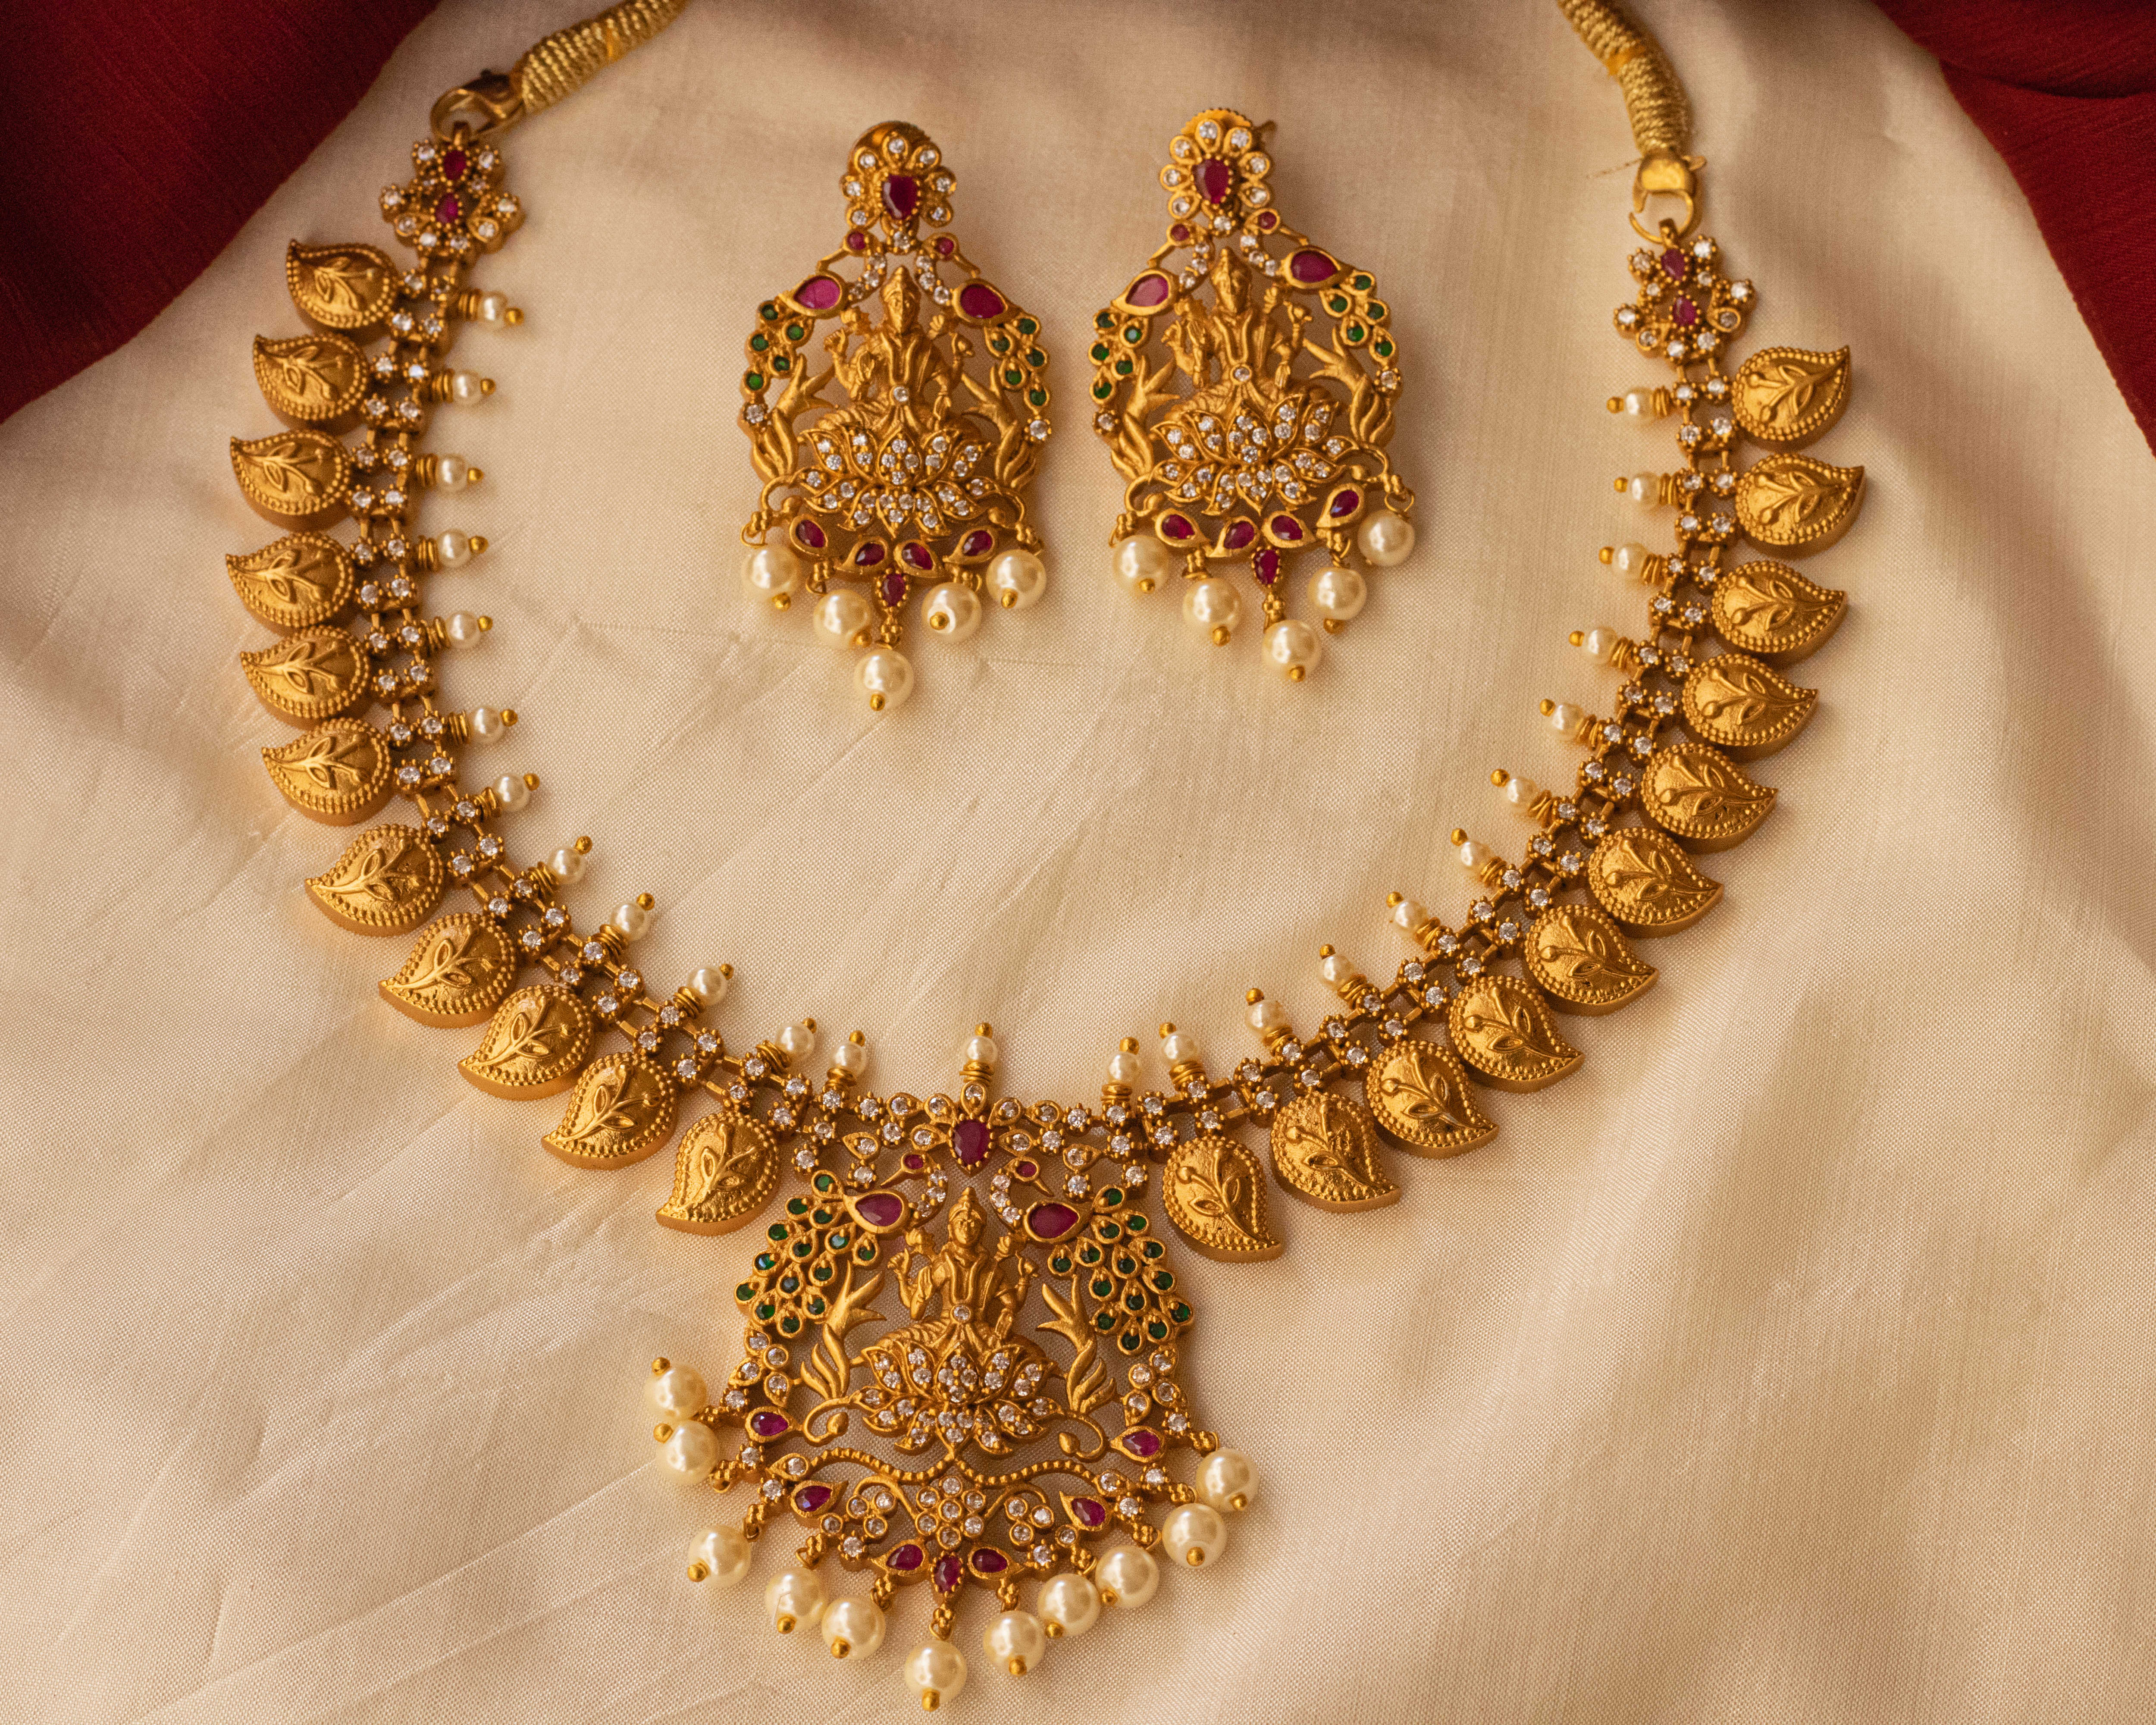  Traditional antique gold necklace and earrings with gemstones, pearls, and intricate detailing.